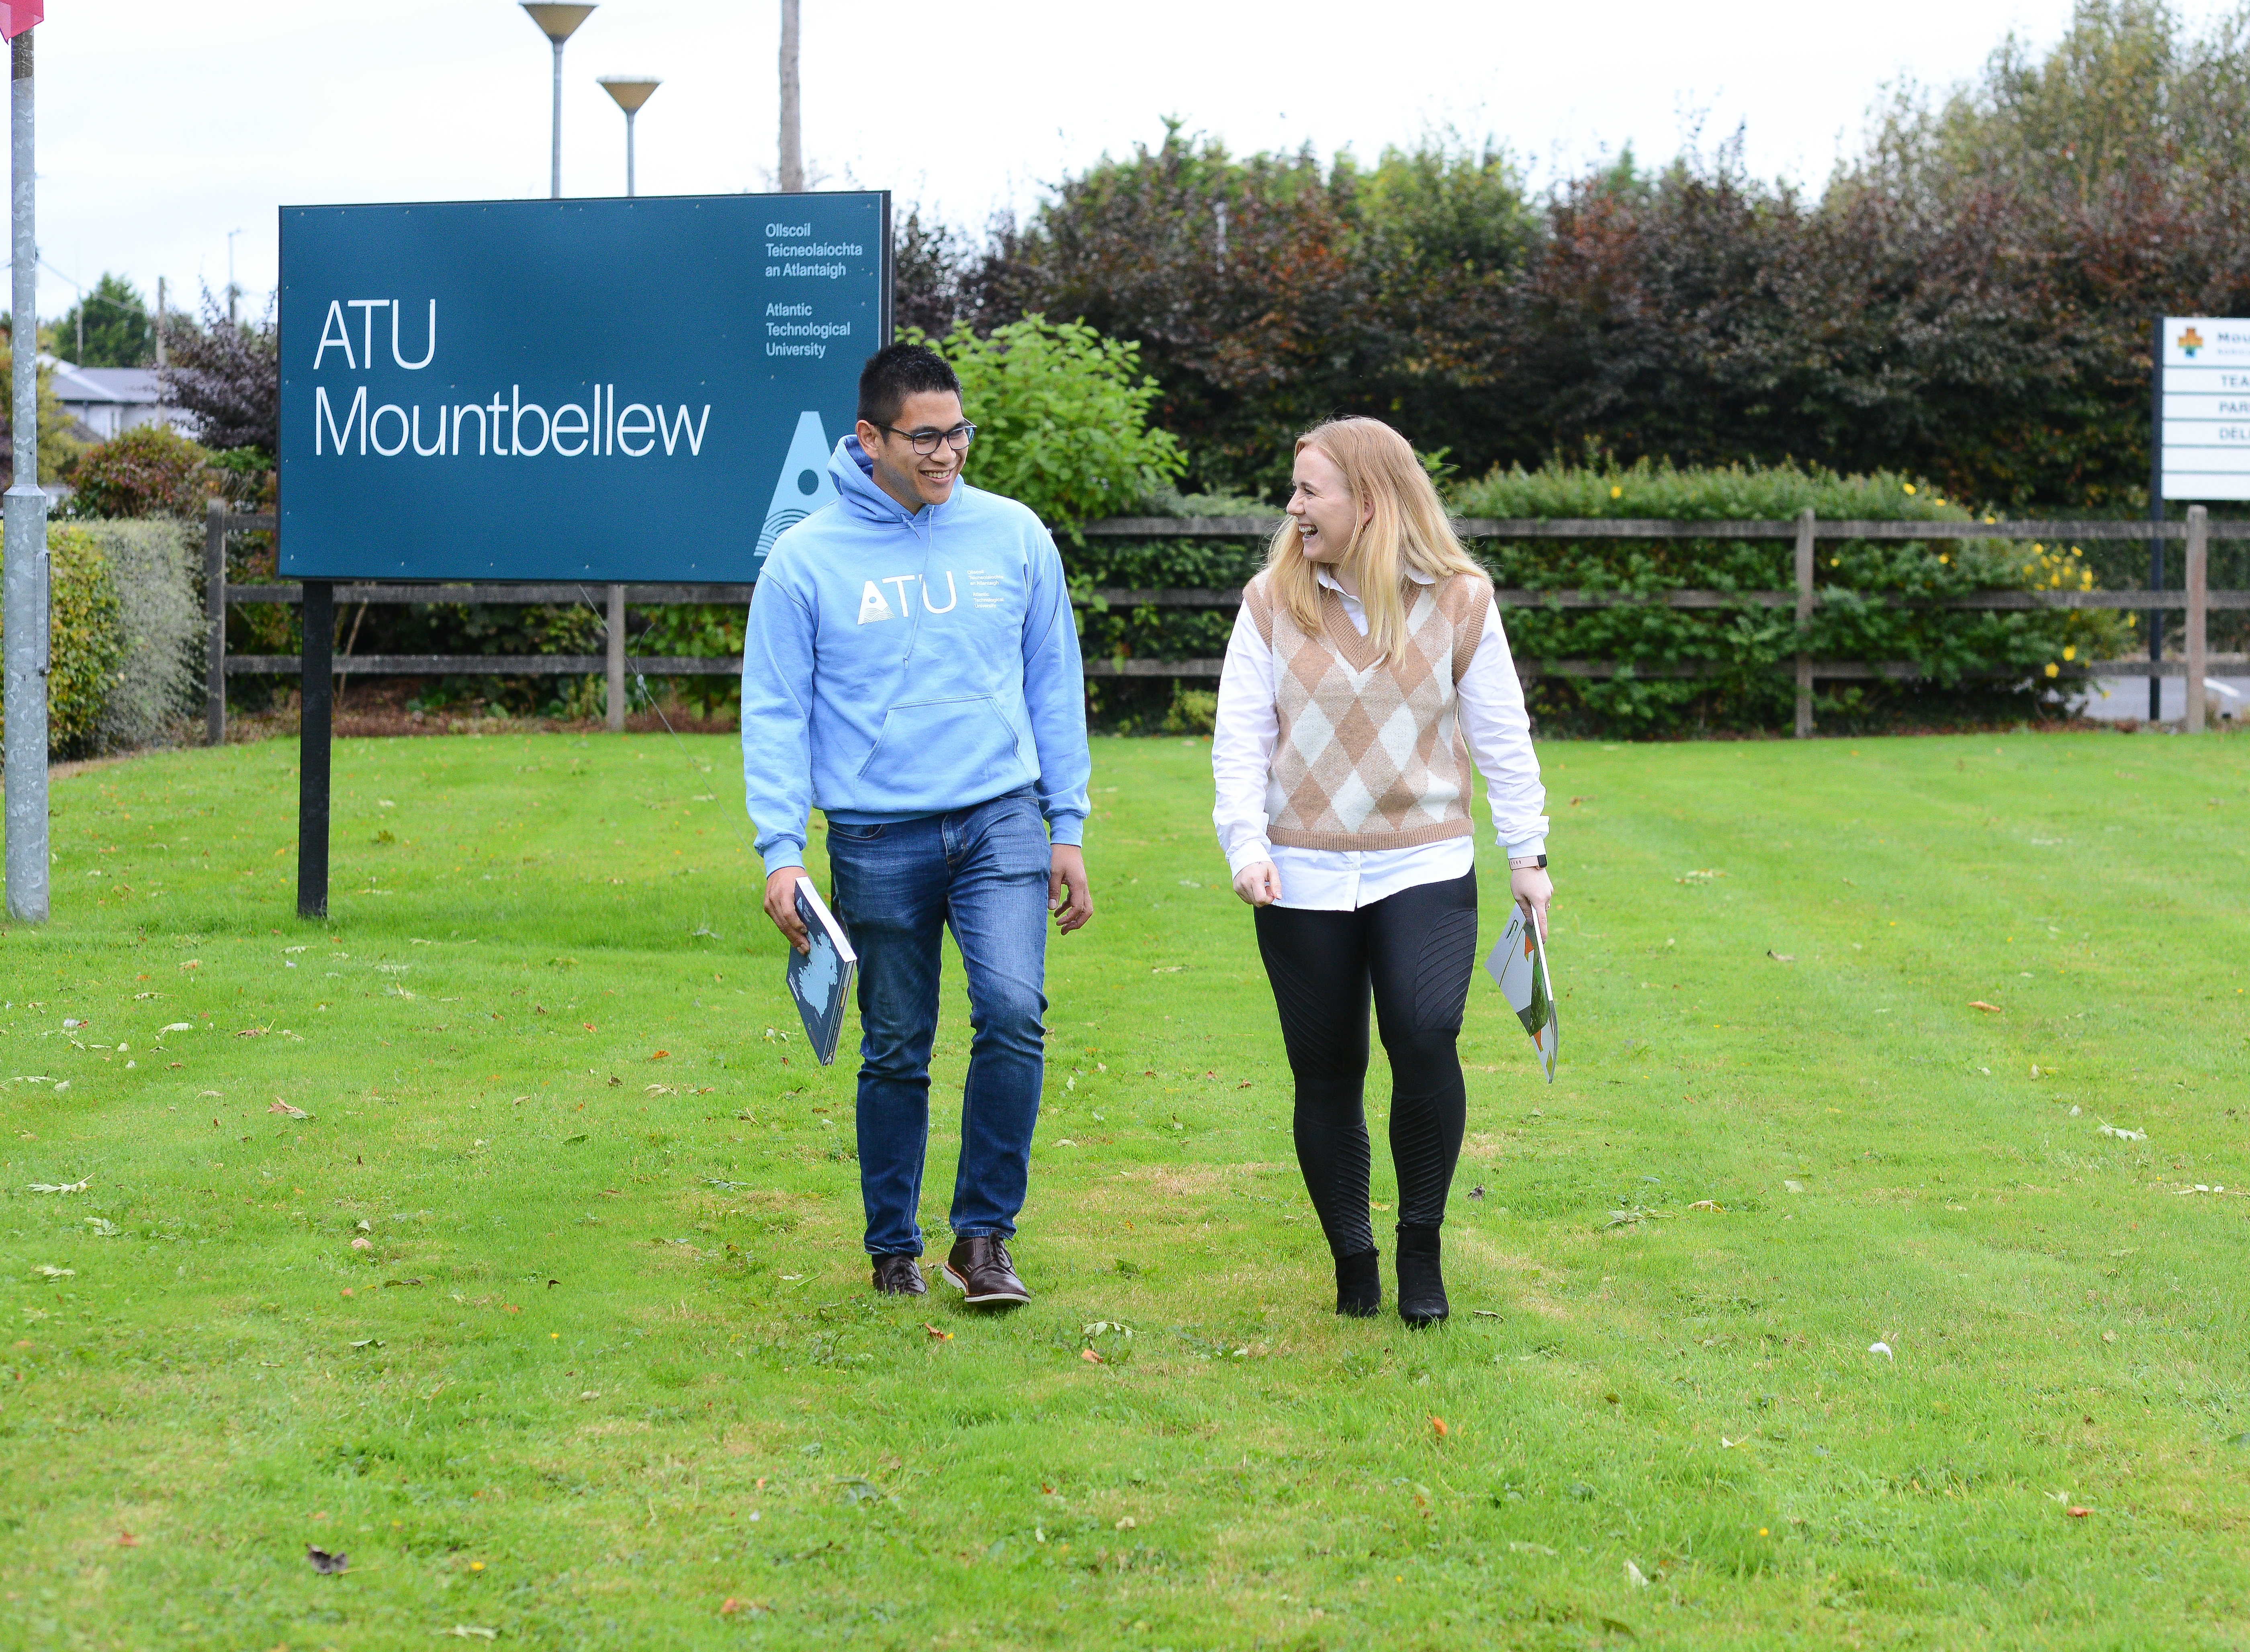 Two students walking outside ATU Mountbellew campus